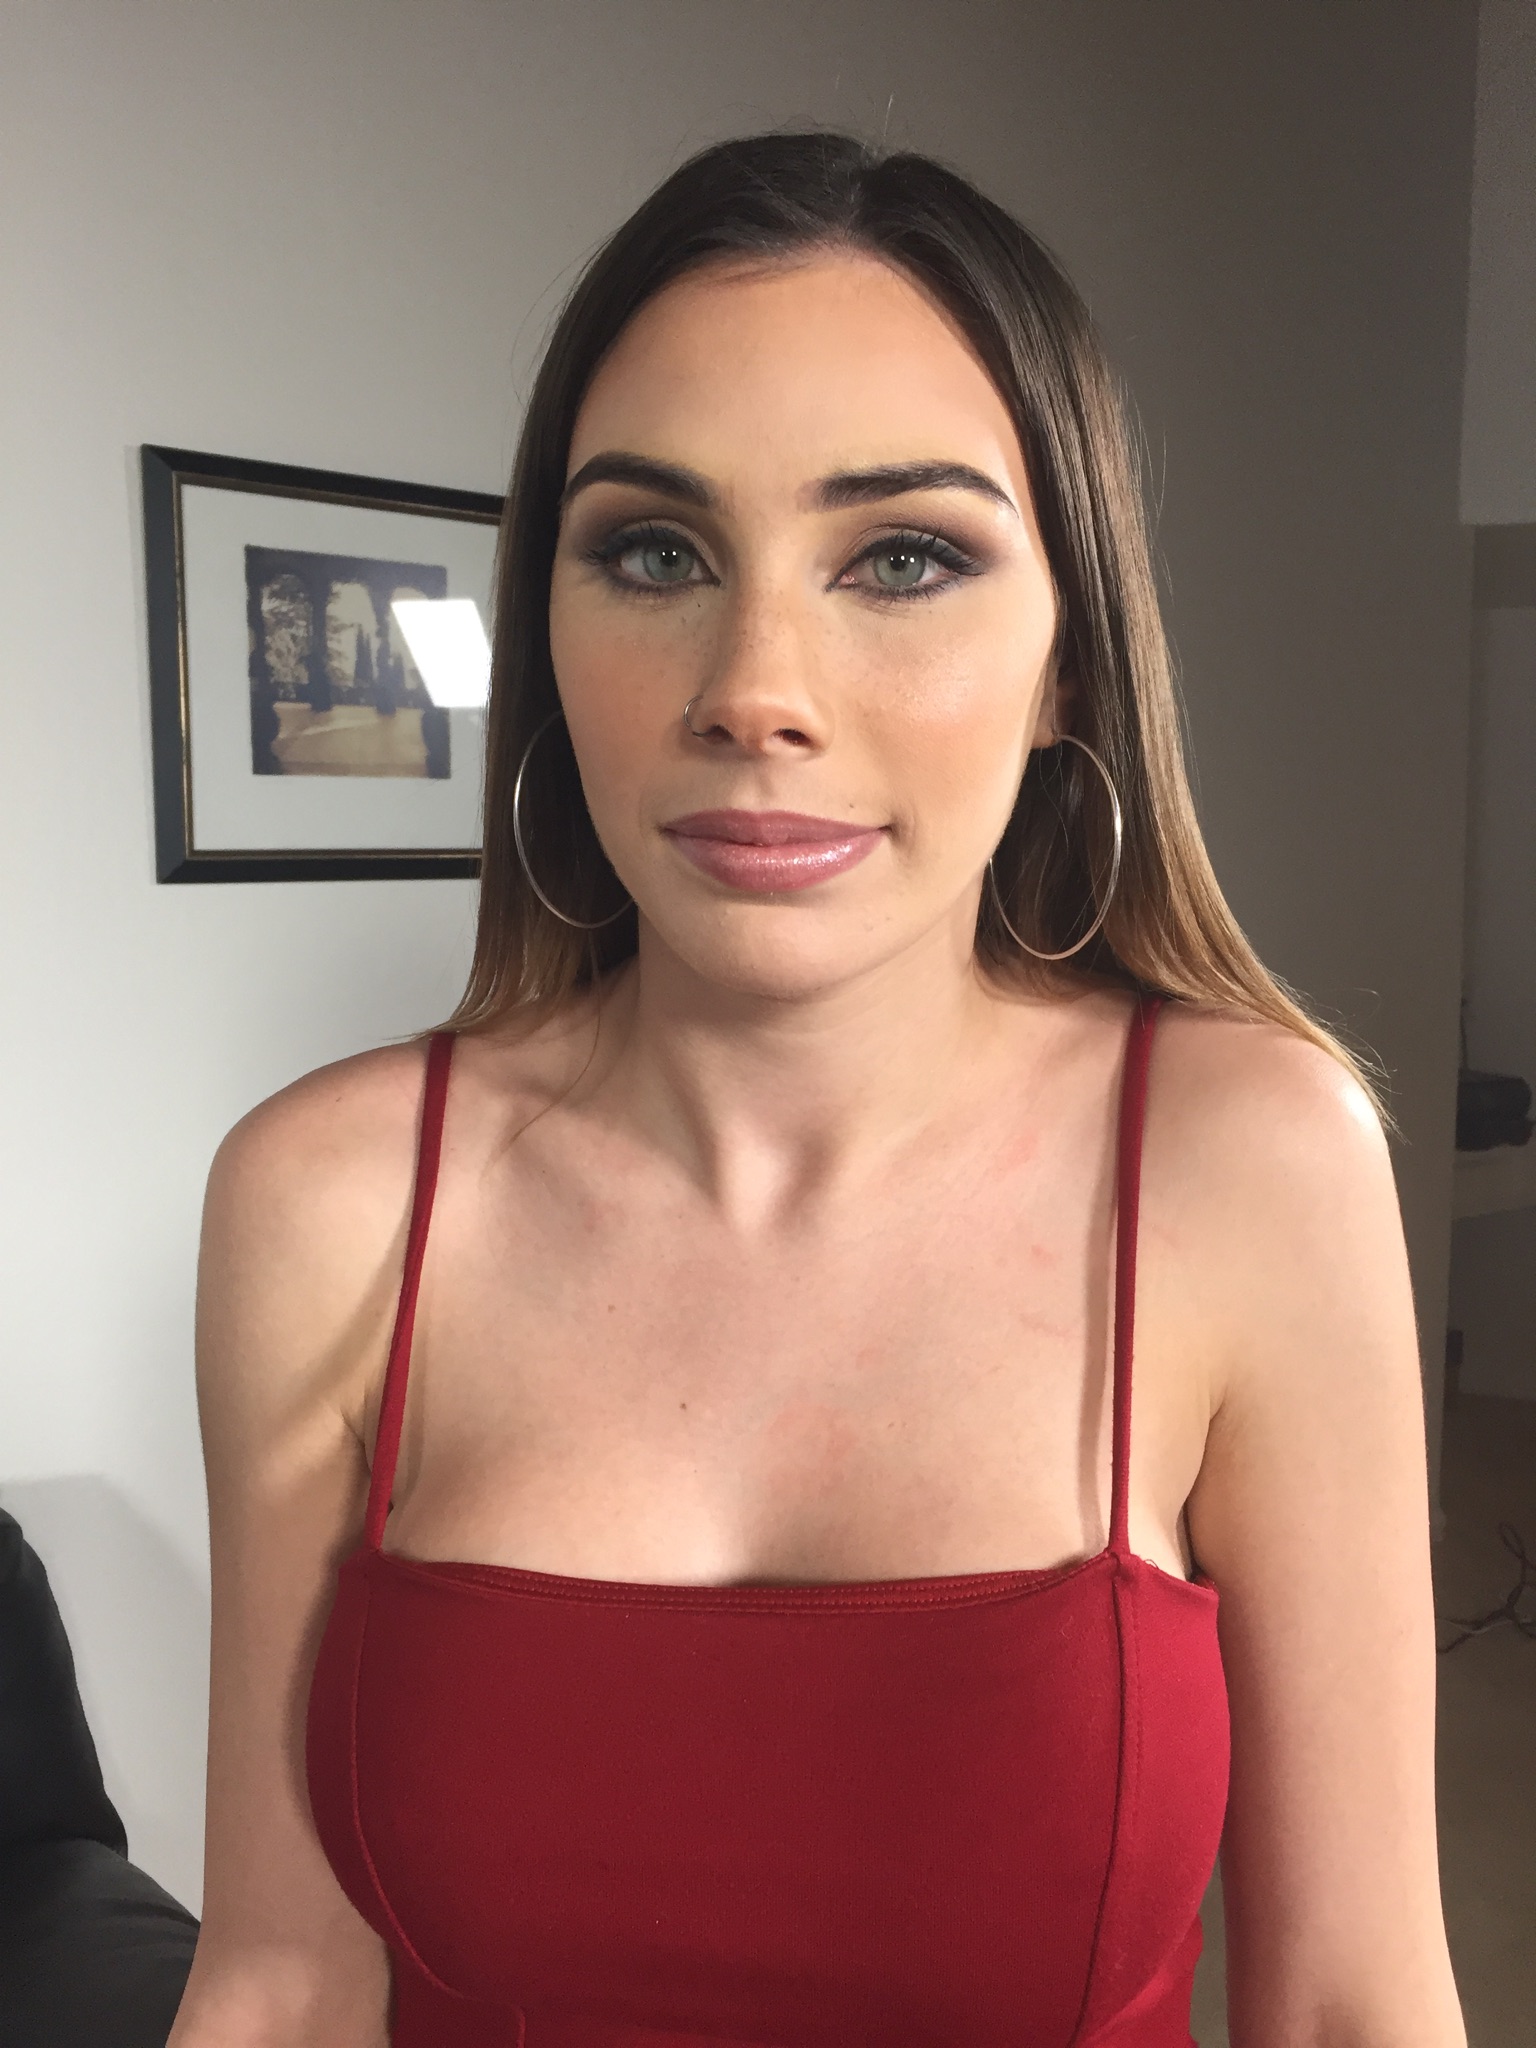 Backroom casting couch lexi Backroom Casting